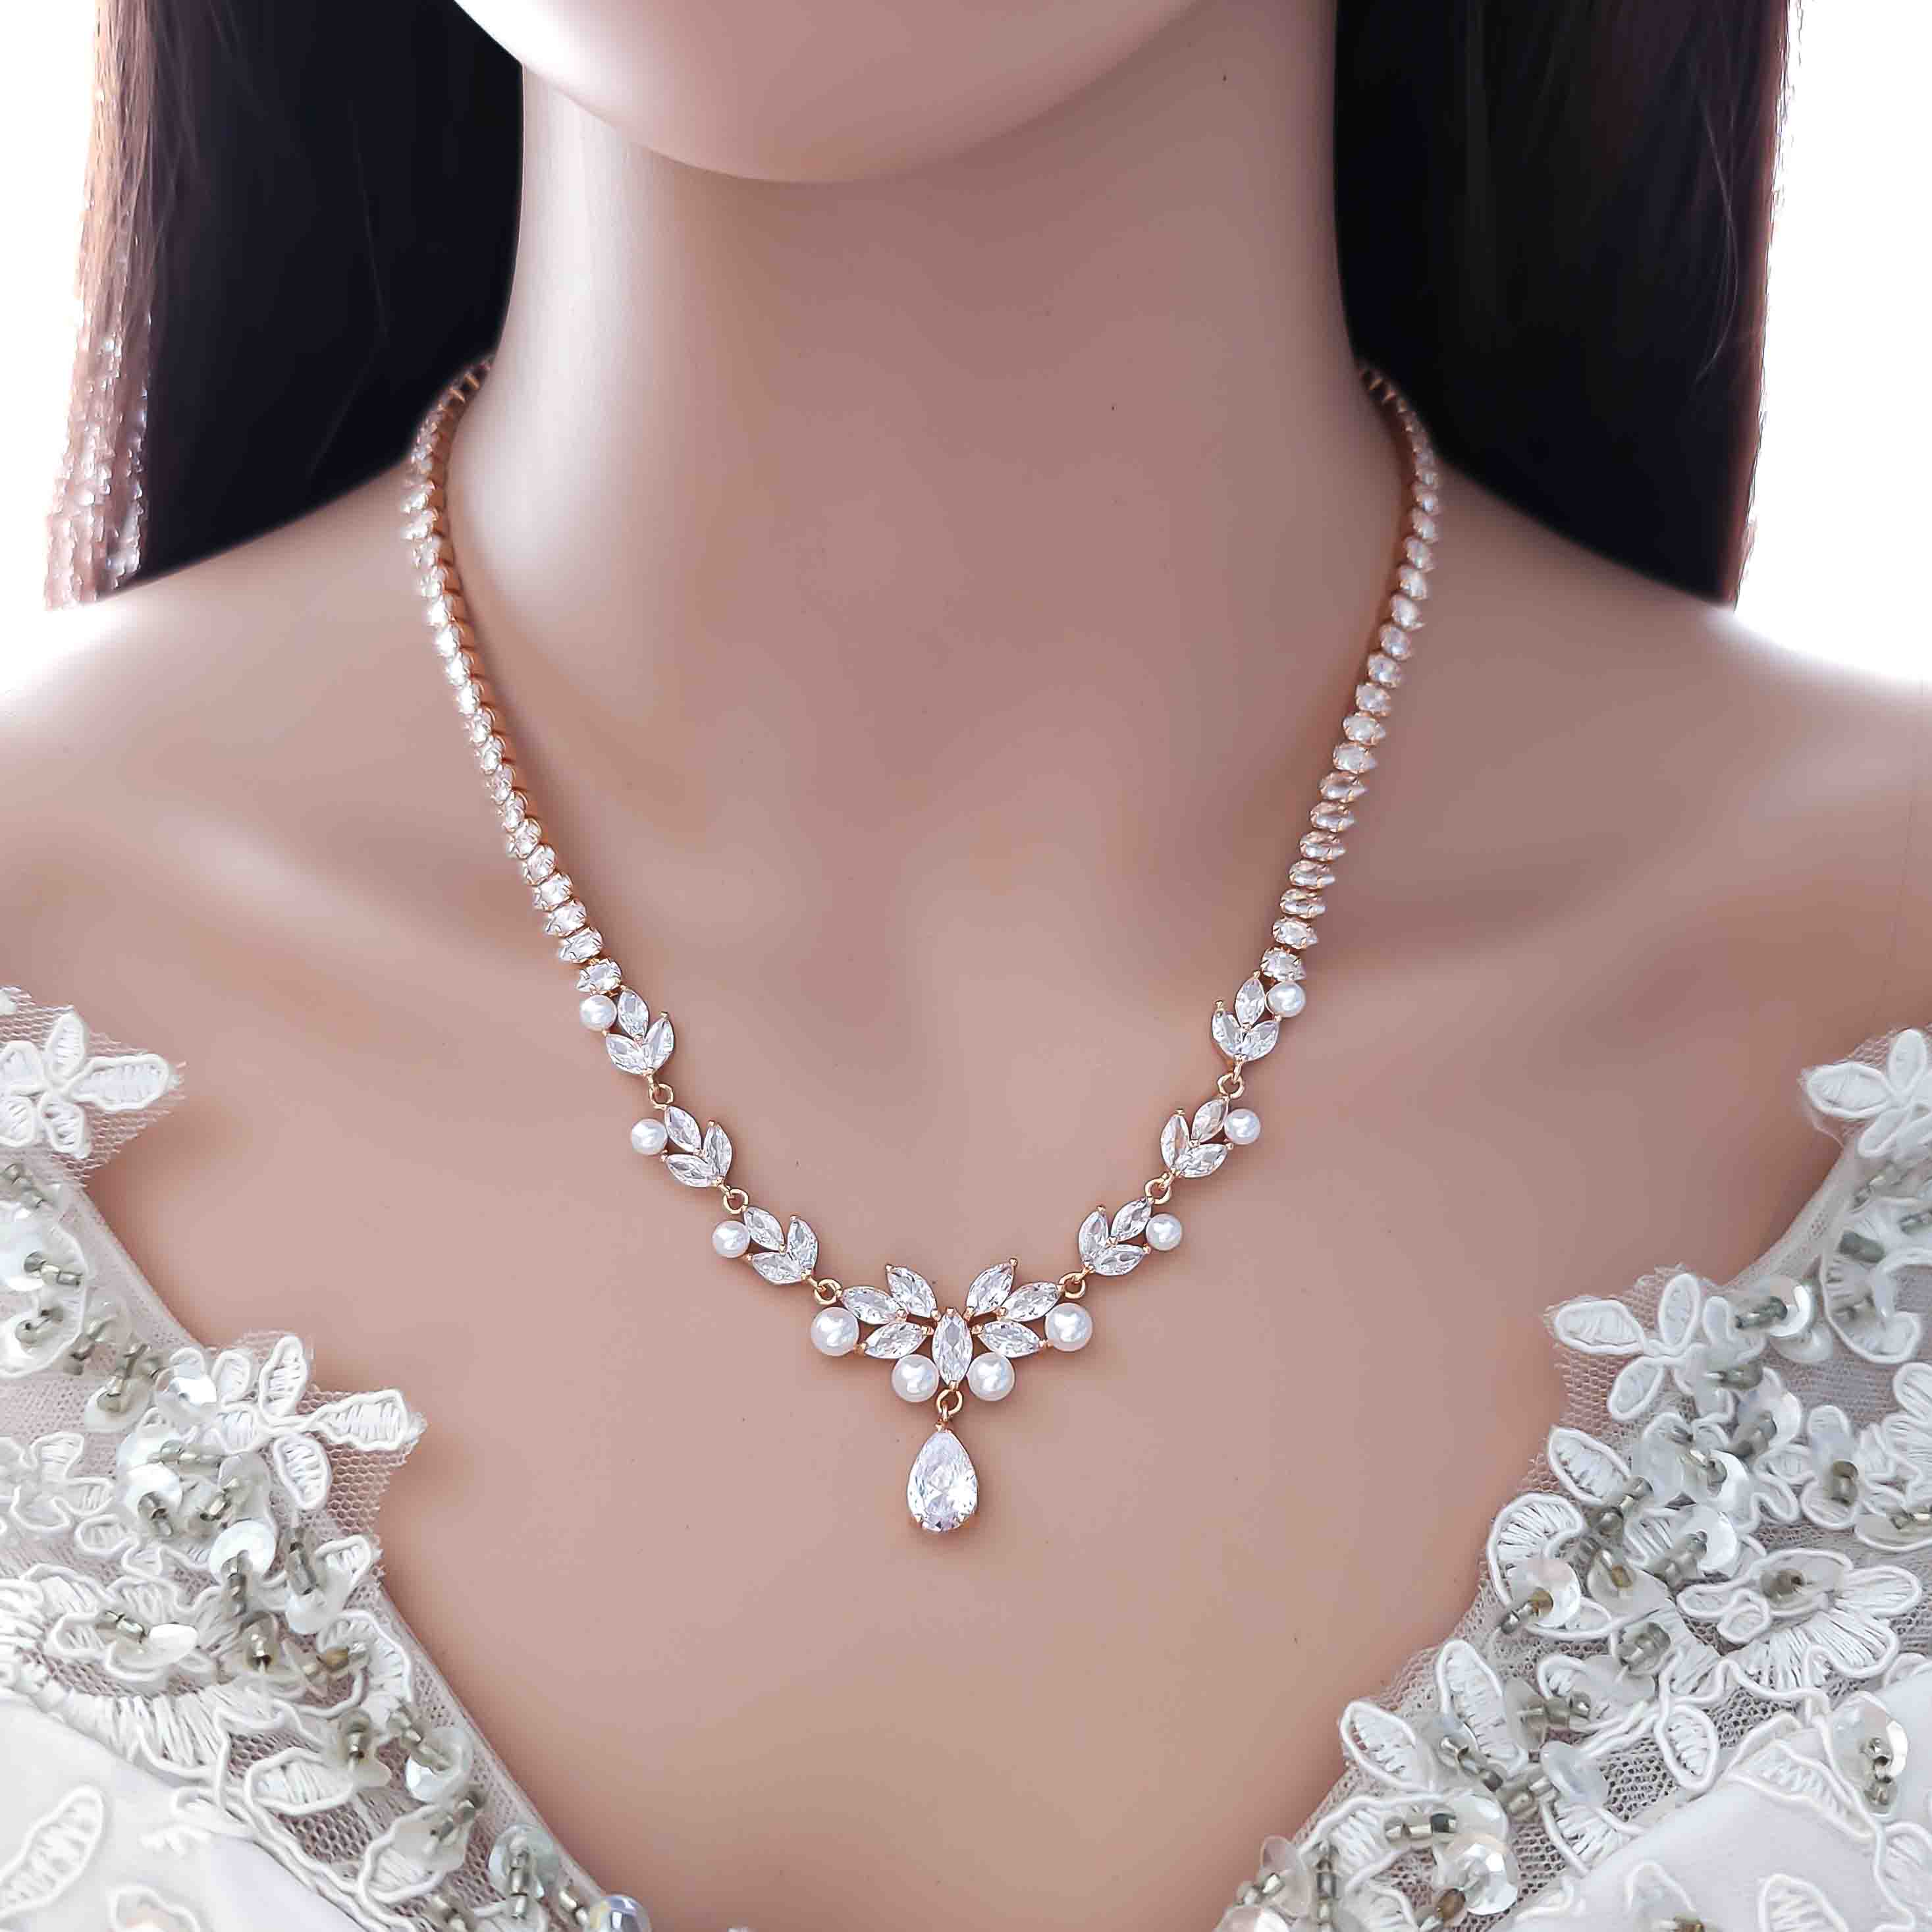 12 Best Wedding pearl necklaces ideas | pearl necklace wedding, wedding  jewelry, pearl jewelry